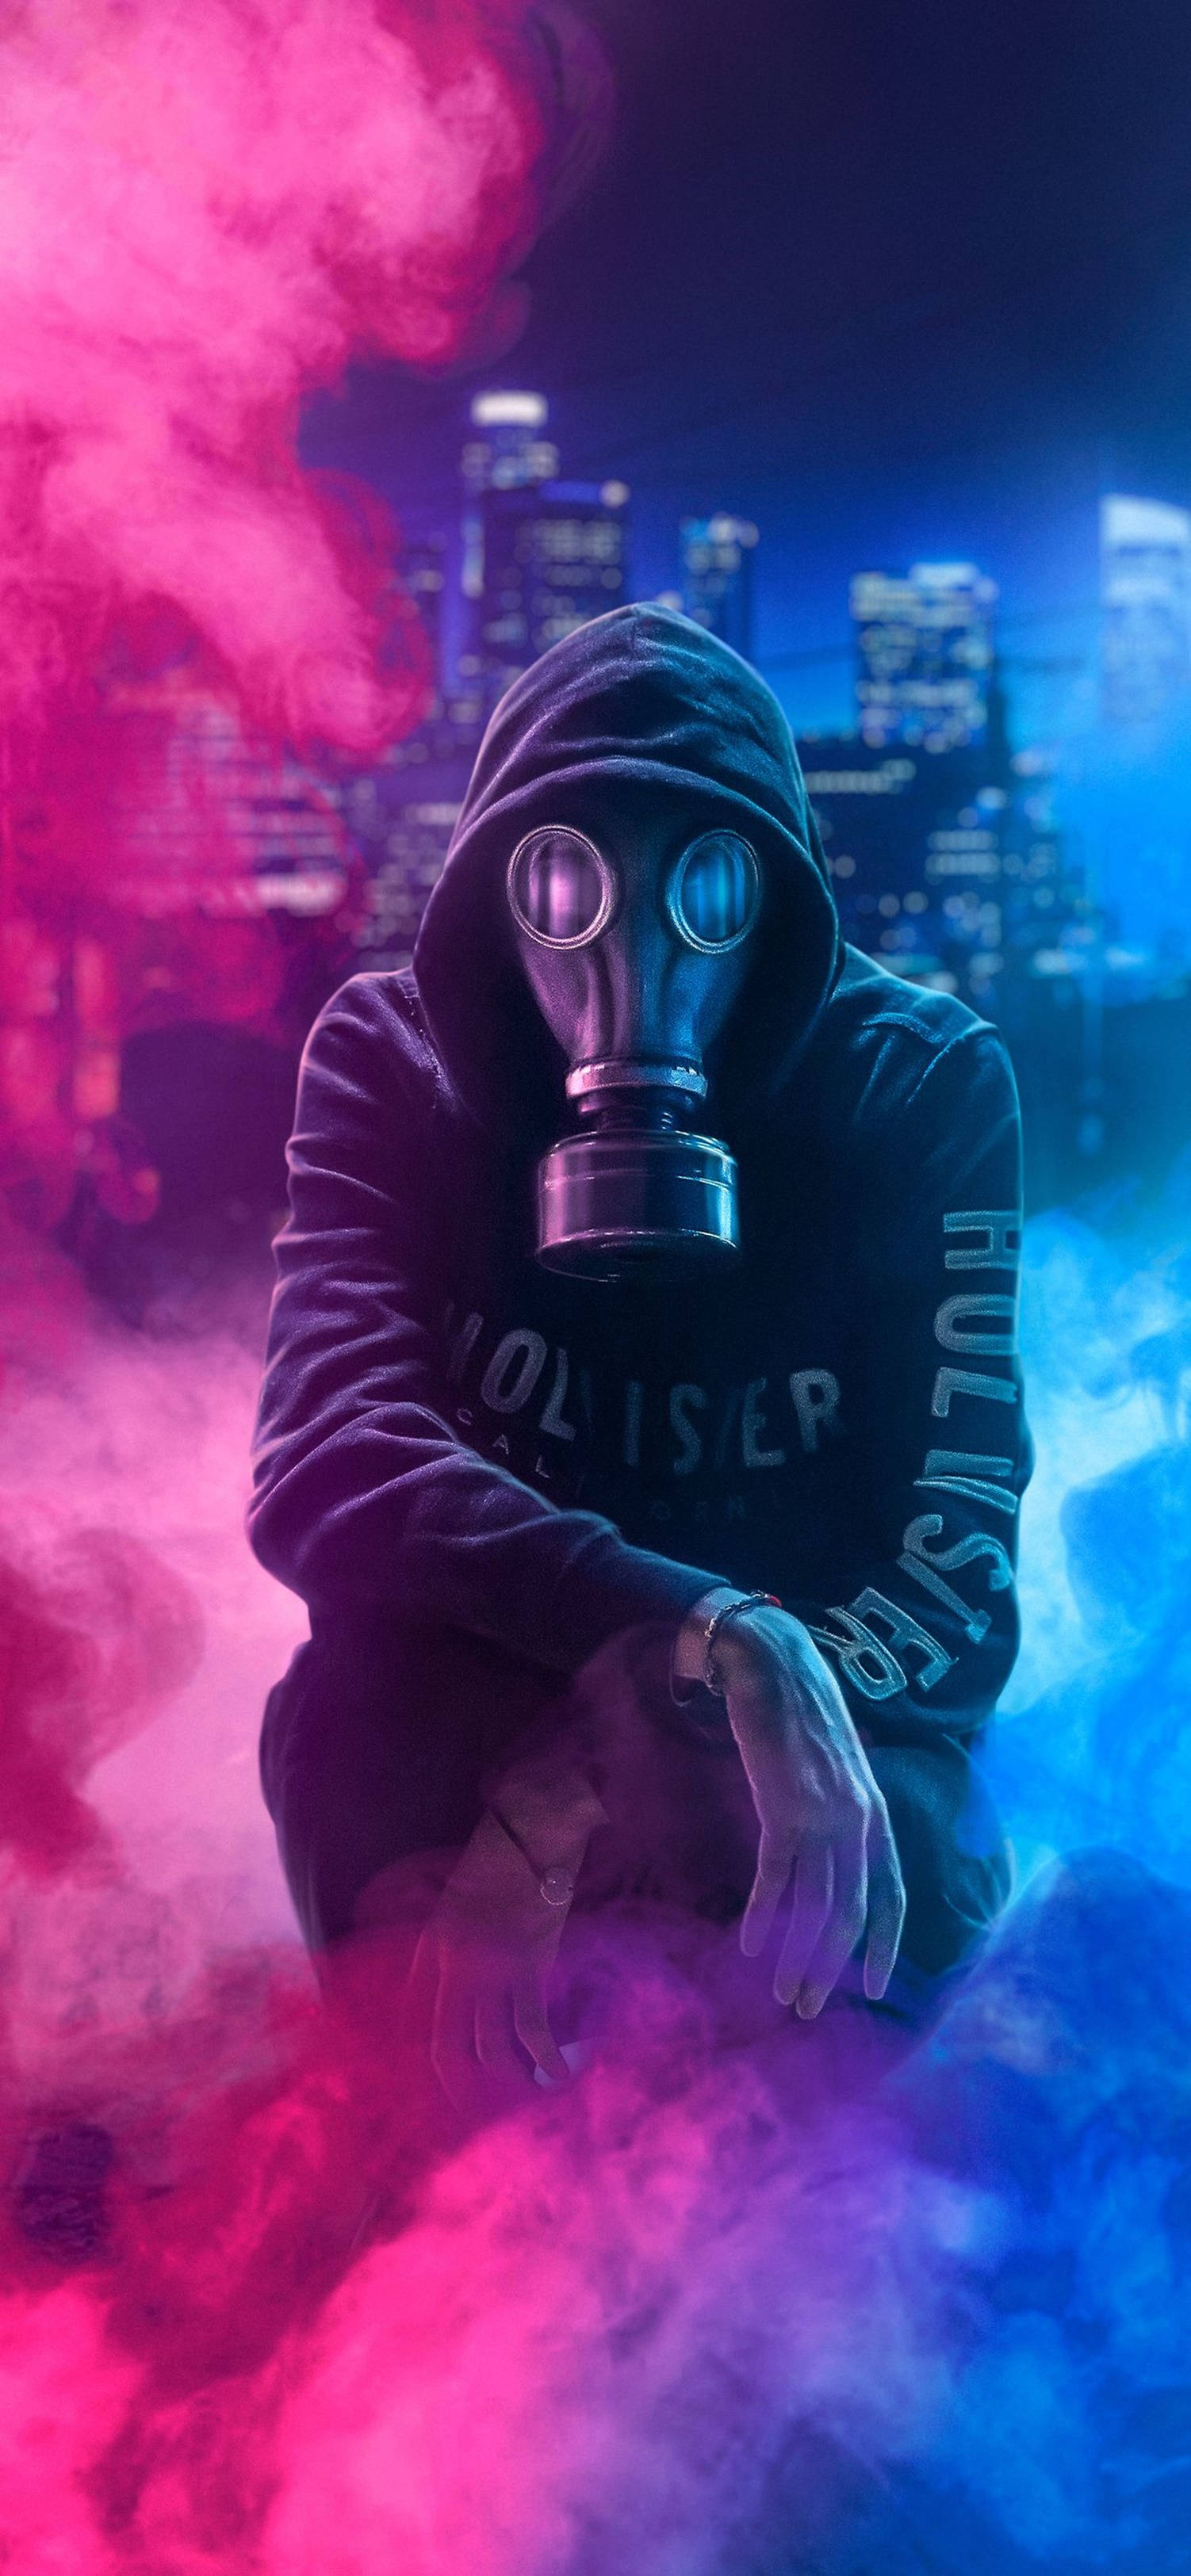 4k Anime Iphone Mysterious Man With Gas Mask Wallpaper